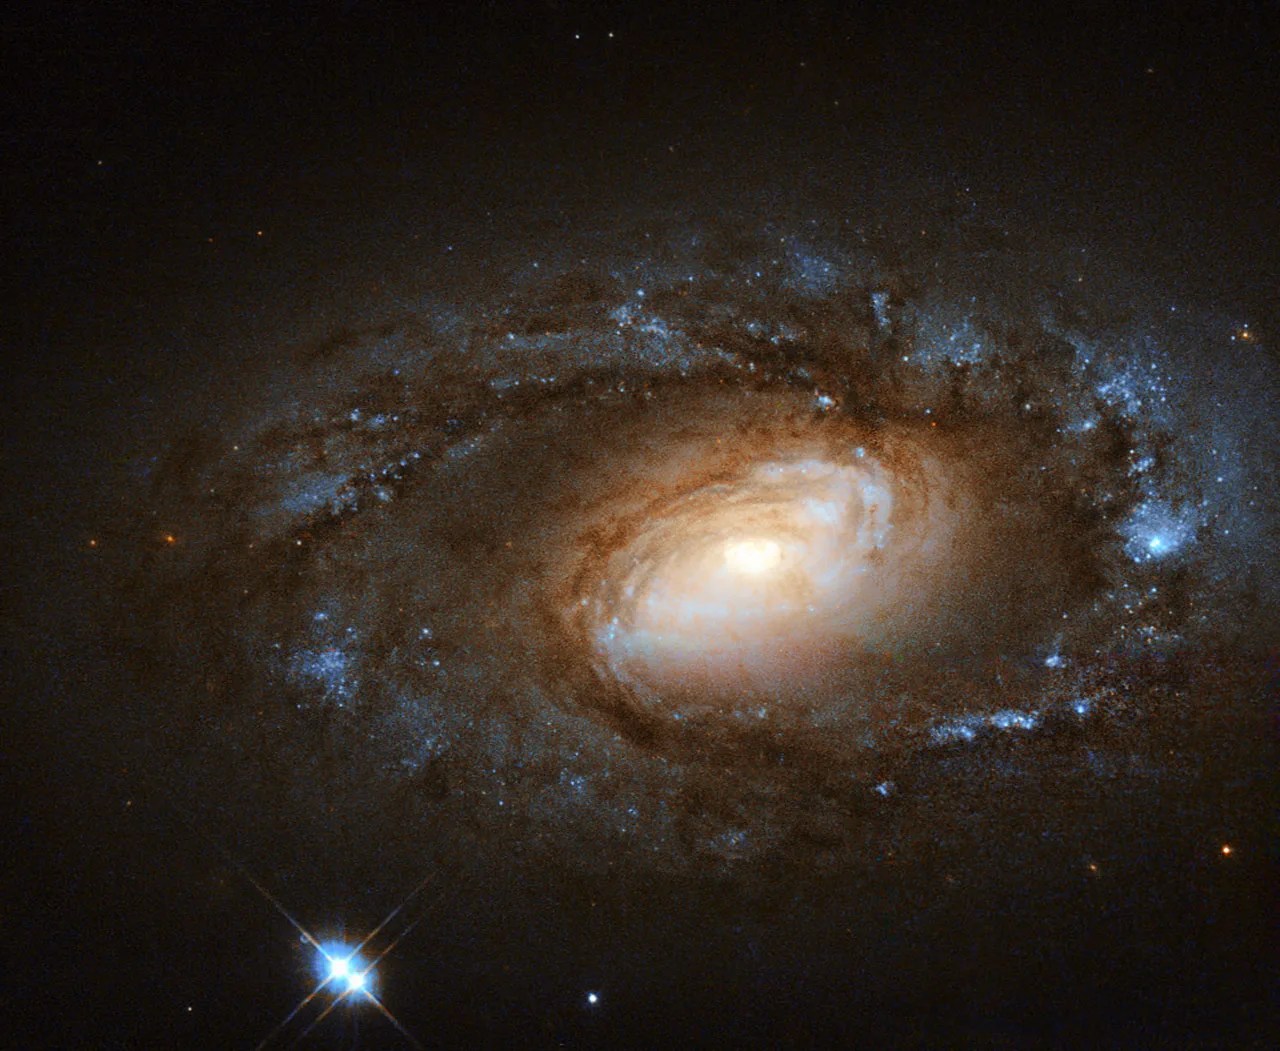 Small, tight spiral galaxy with a glowing gold center and dark dust lanes and clusters of blue stars in its winding arms.